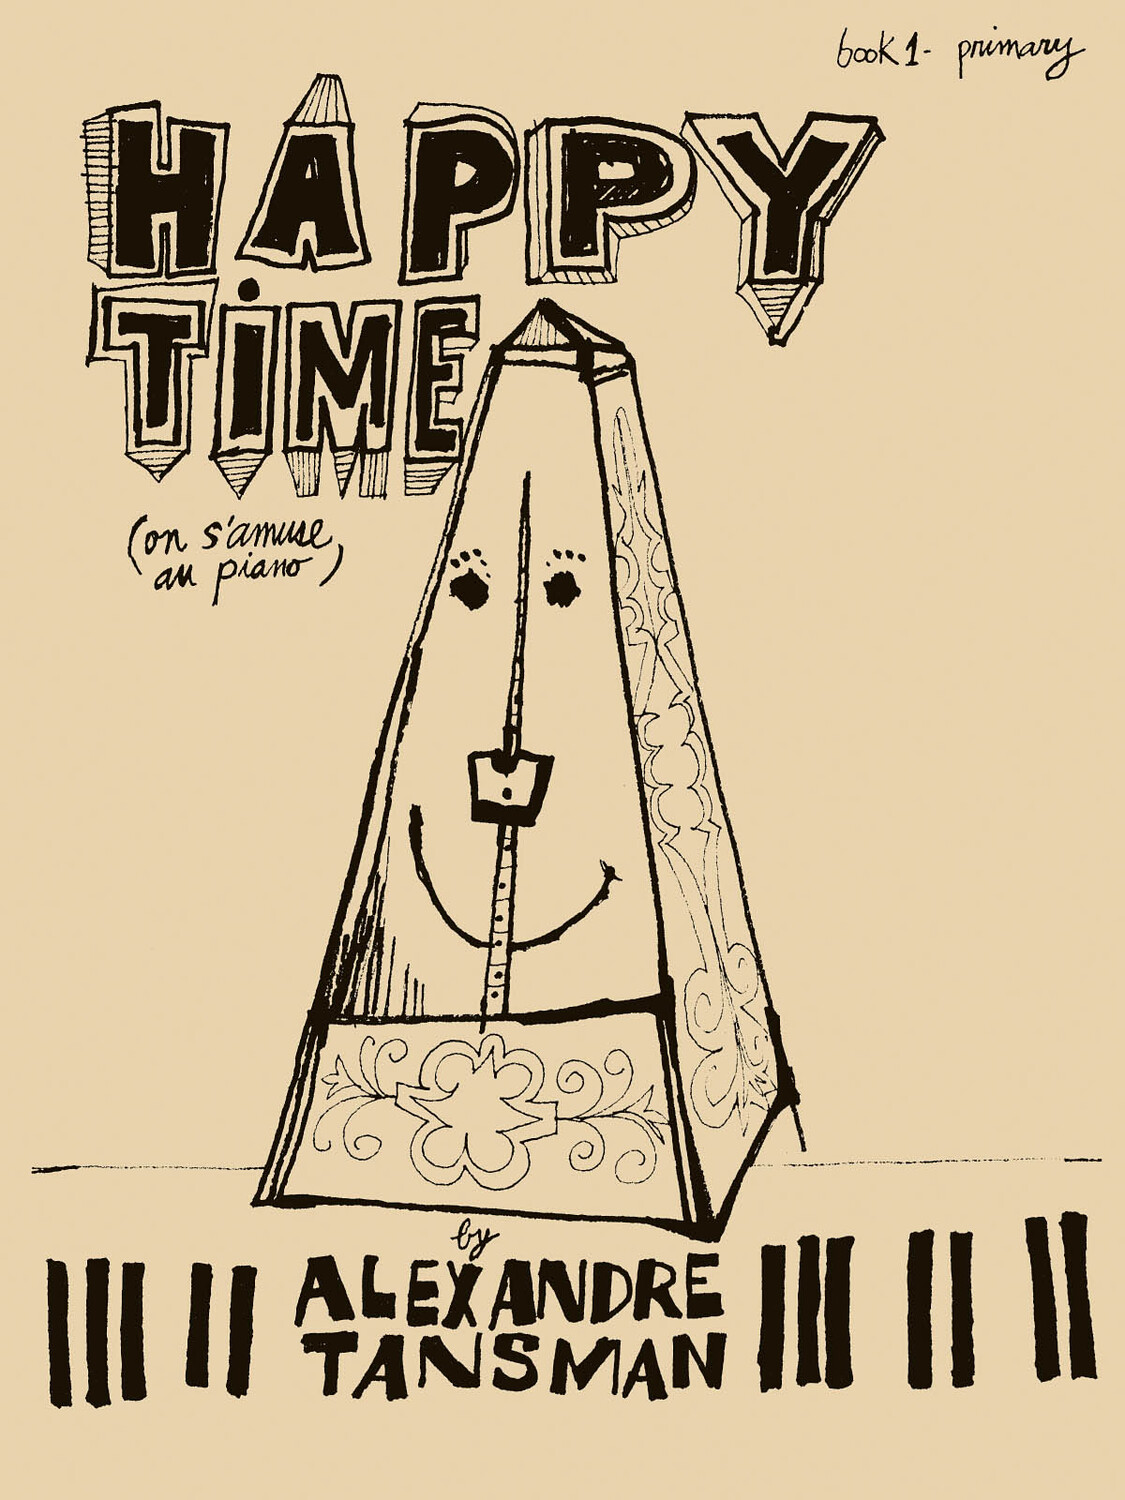 Cover: 73999201048 | Happy Time, Book 1 - Primary | On S'Amuse Au Piano | Alexandre Tansman